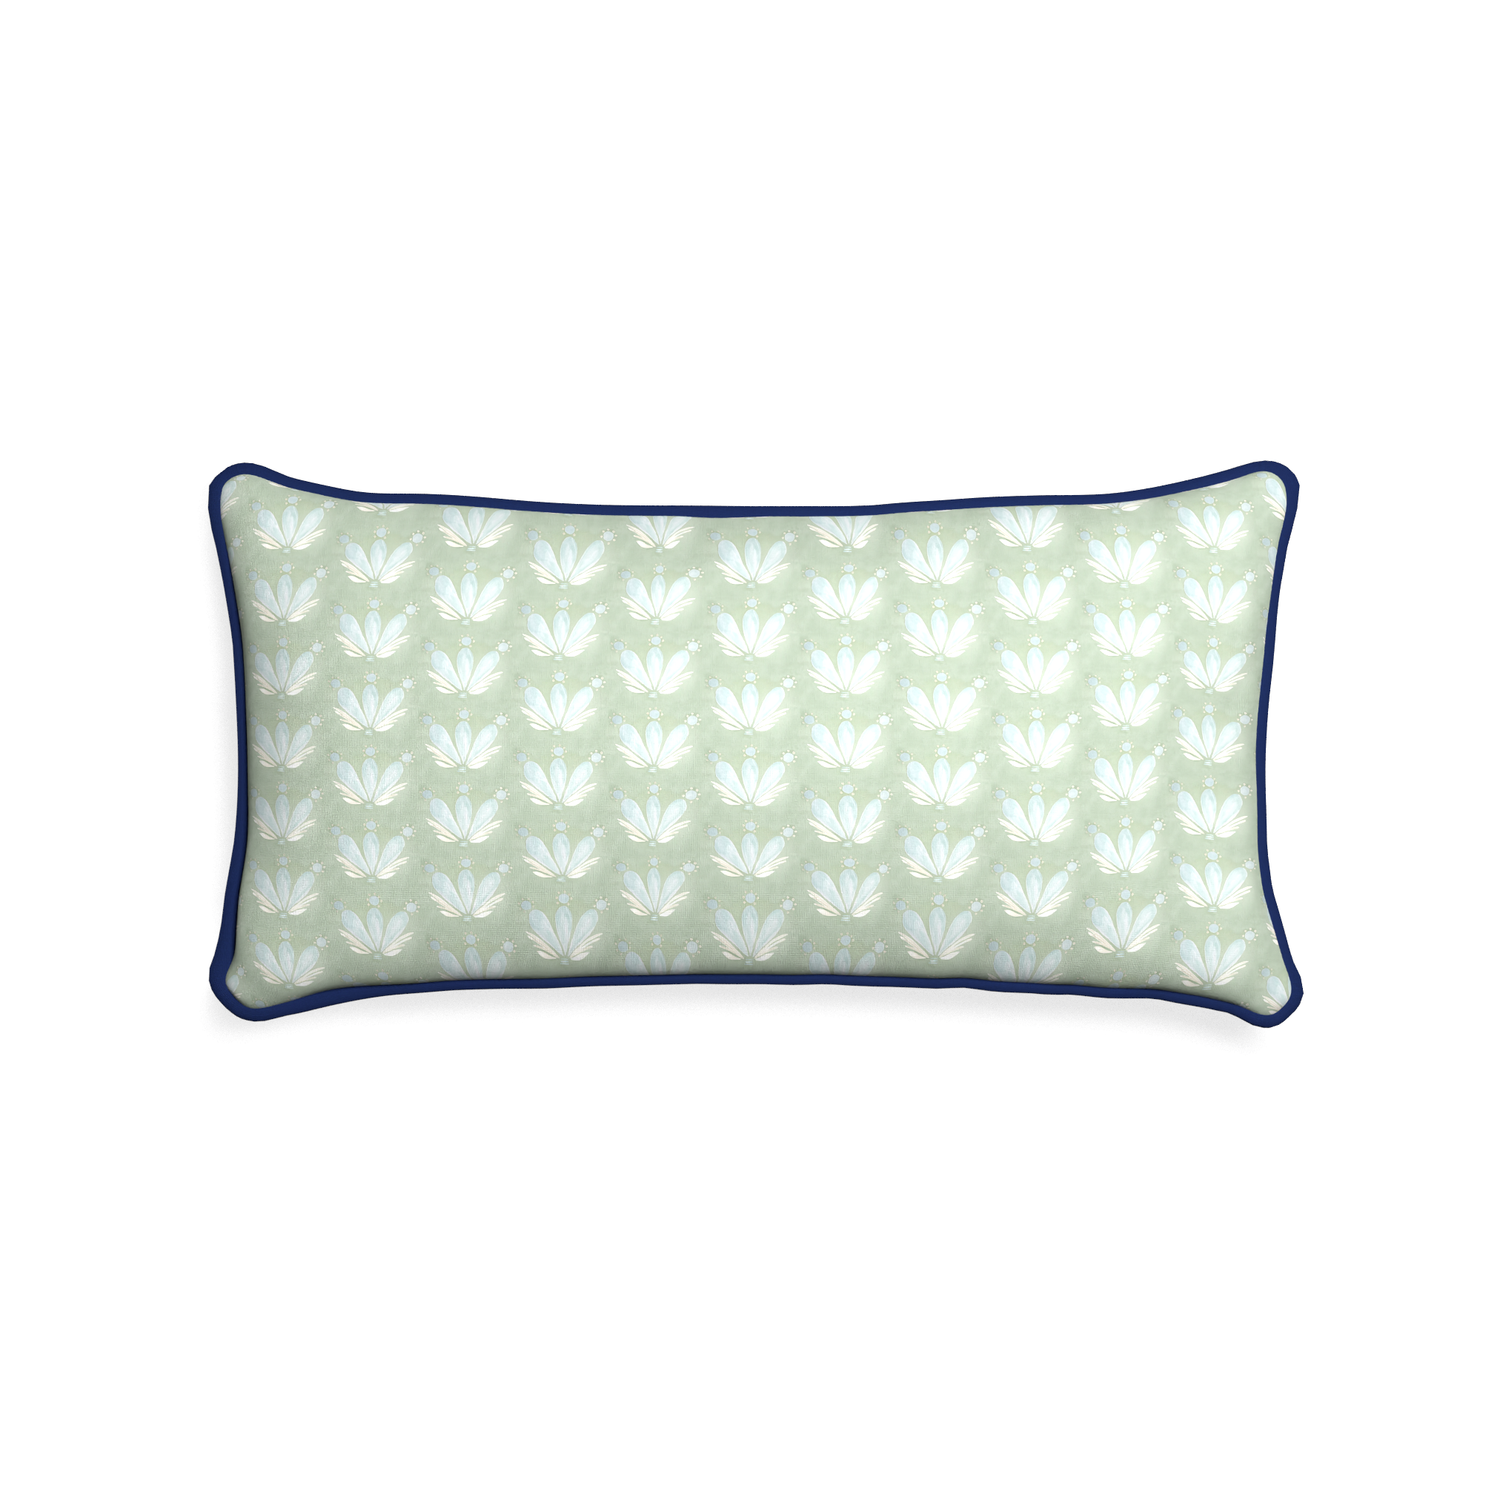 Midi-lumbar serena sea salt custom blue & green floral drop repeatpillow with midnight piping on white background